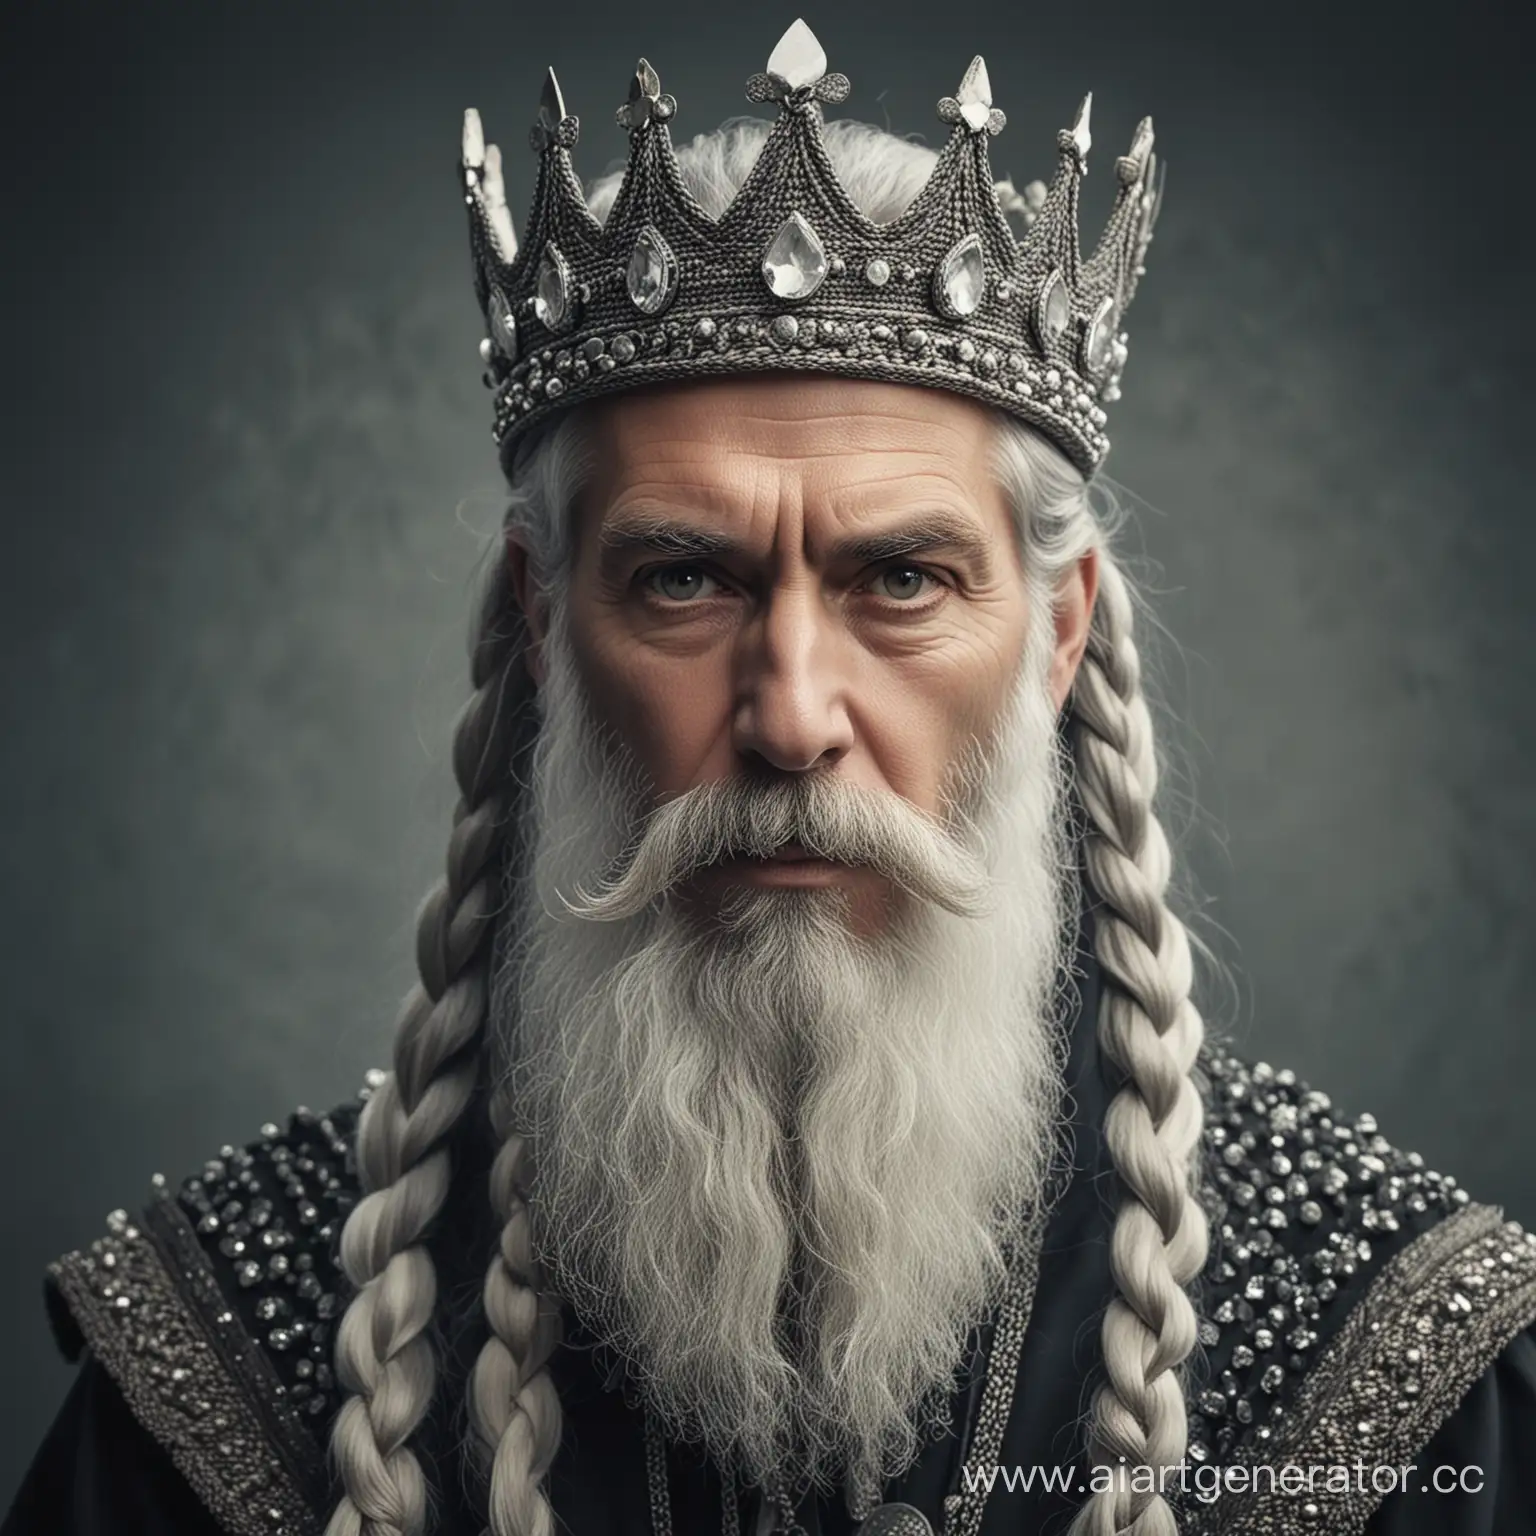 Portrait-of-a-Wise-King-with-Braided-Beard-and-Crown-of-White-Stones